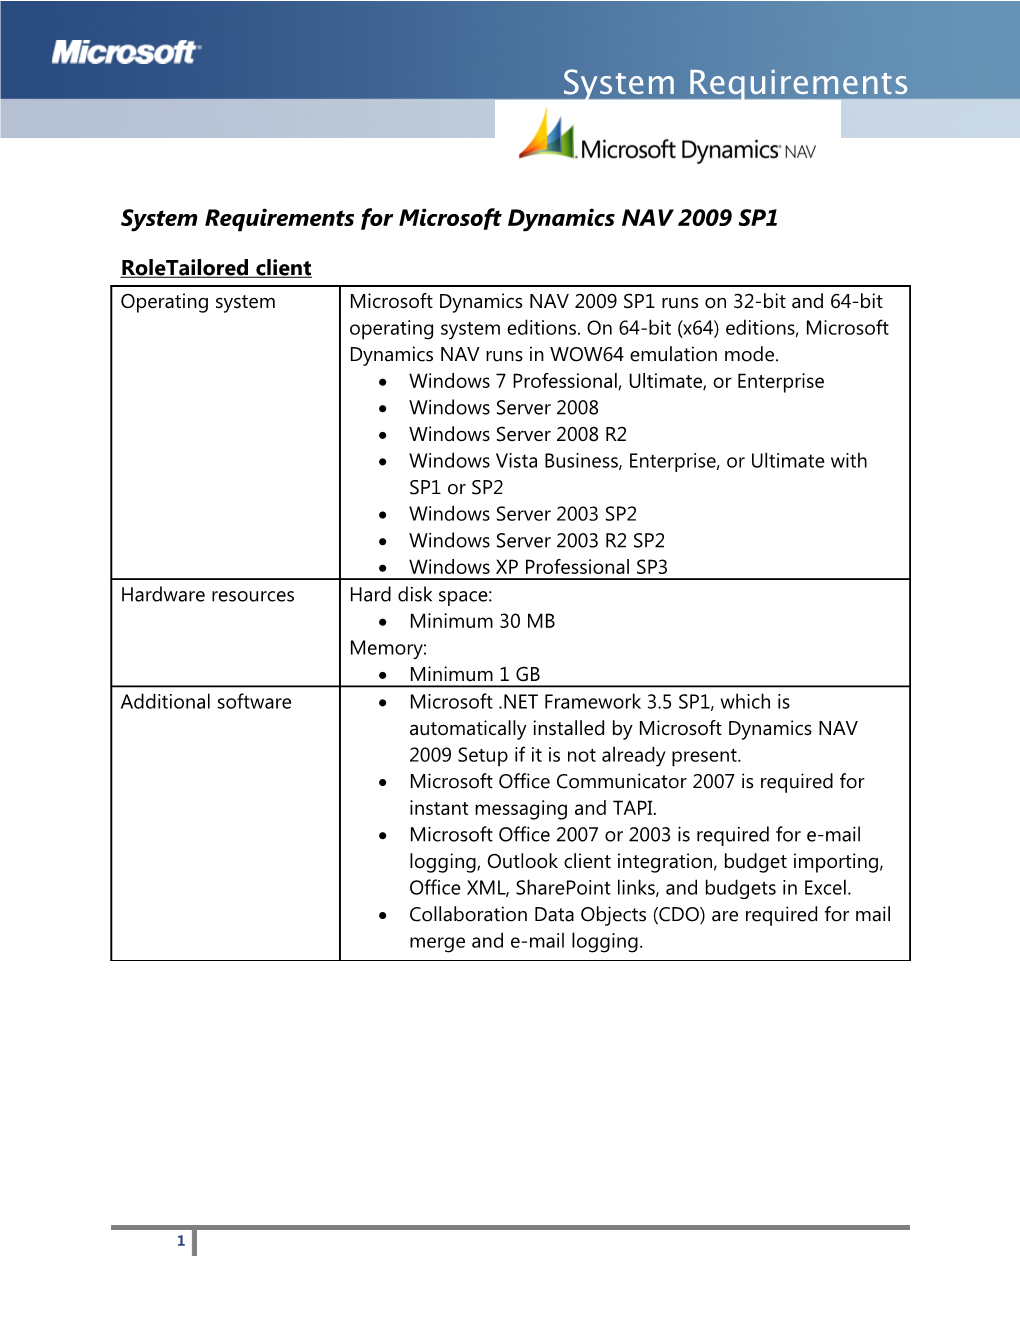 System Requirements for Microsoft Dynamics NAV 2009